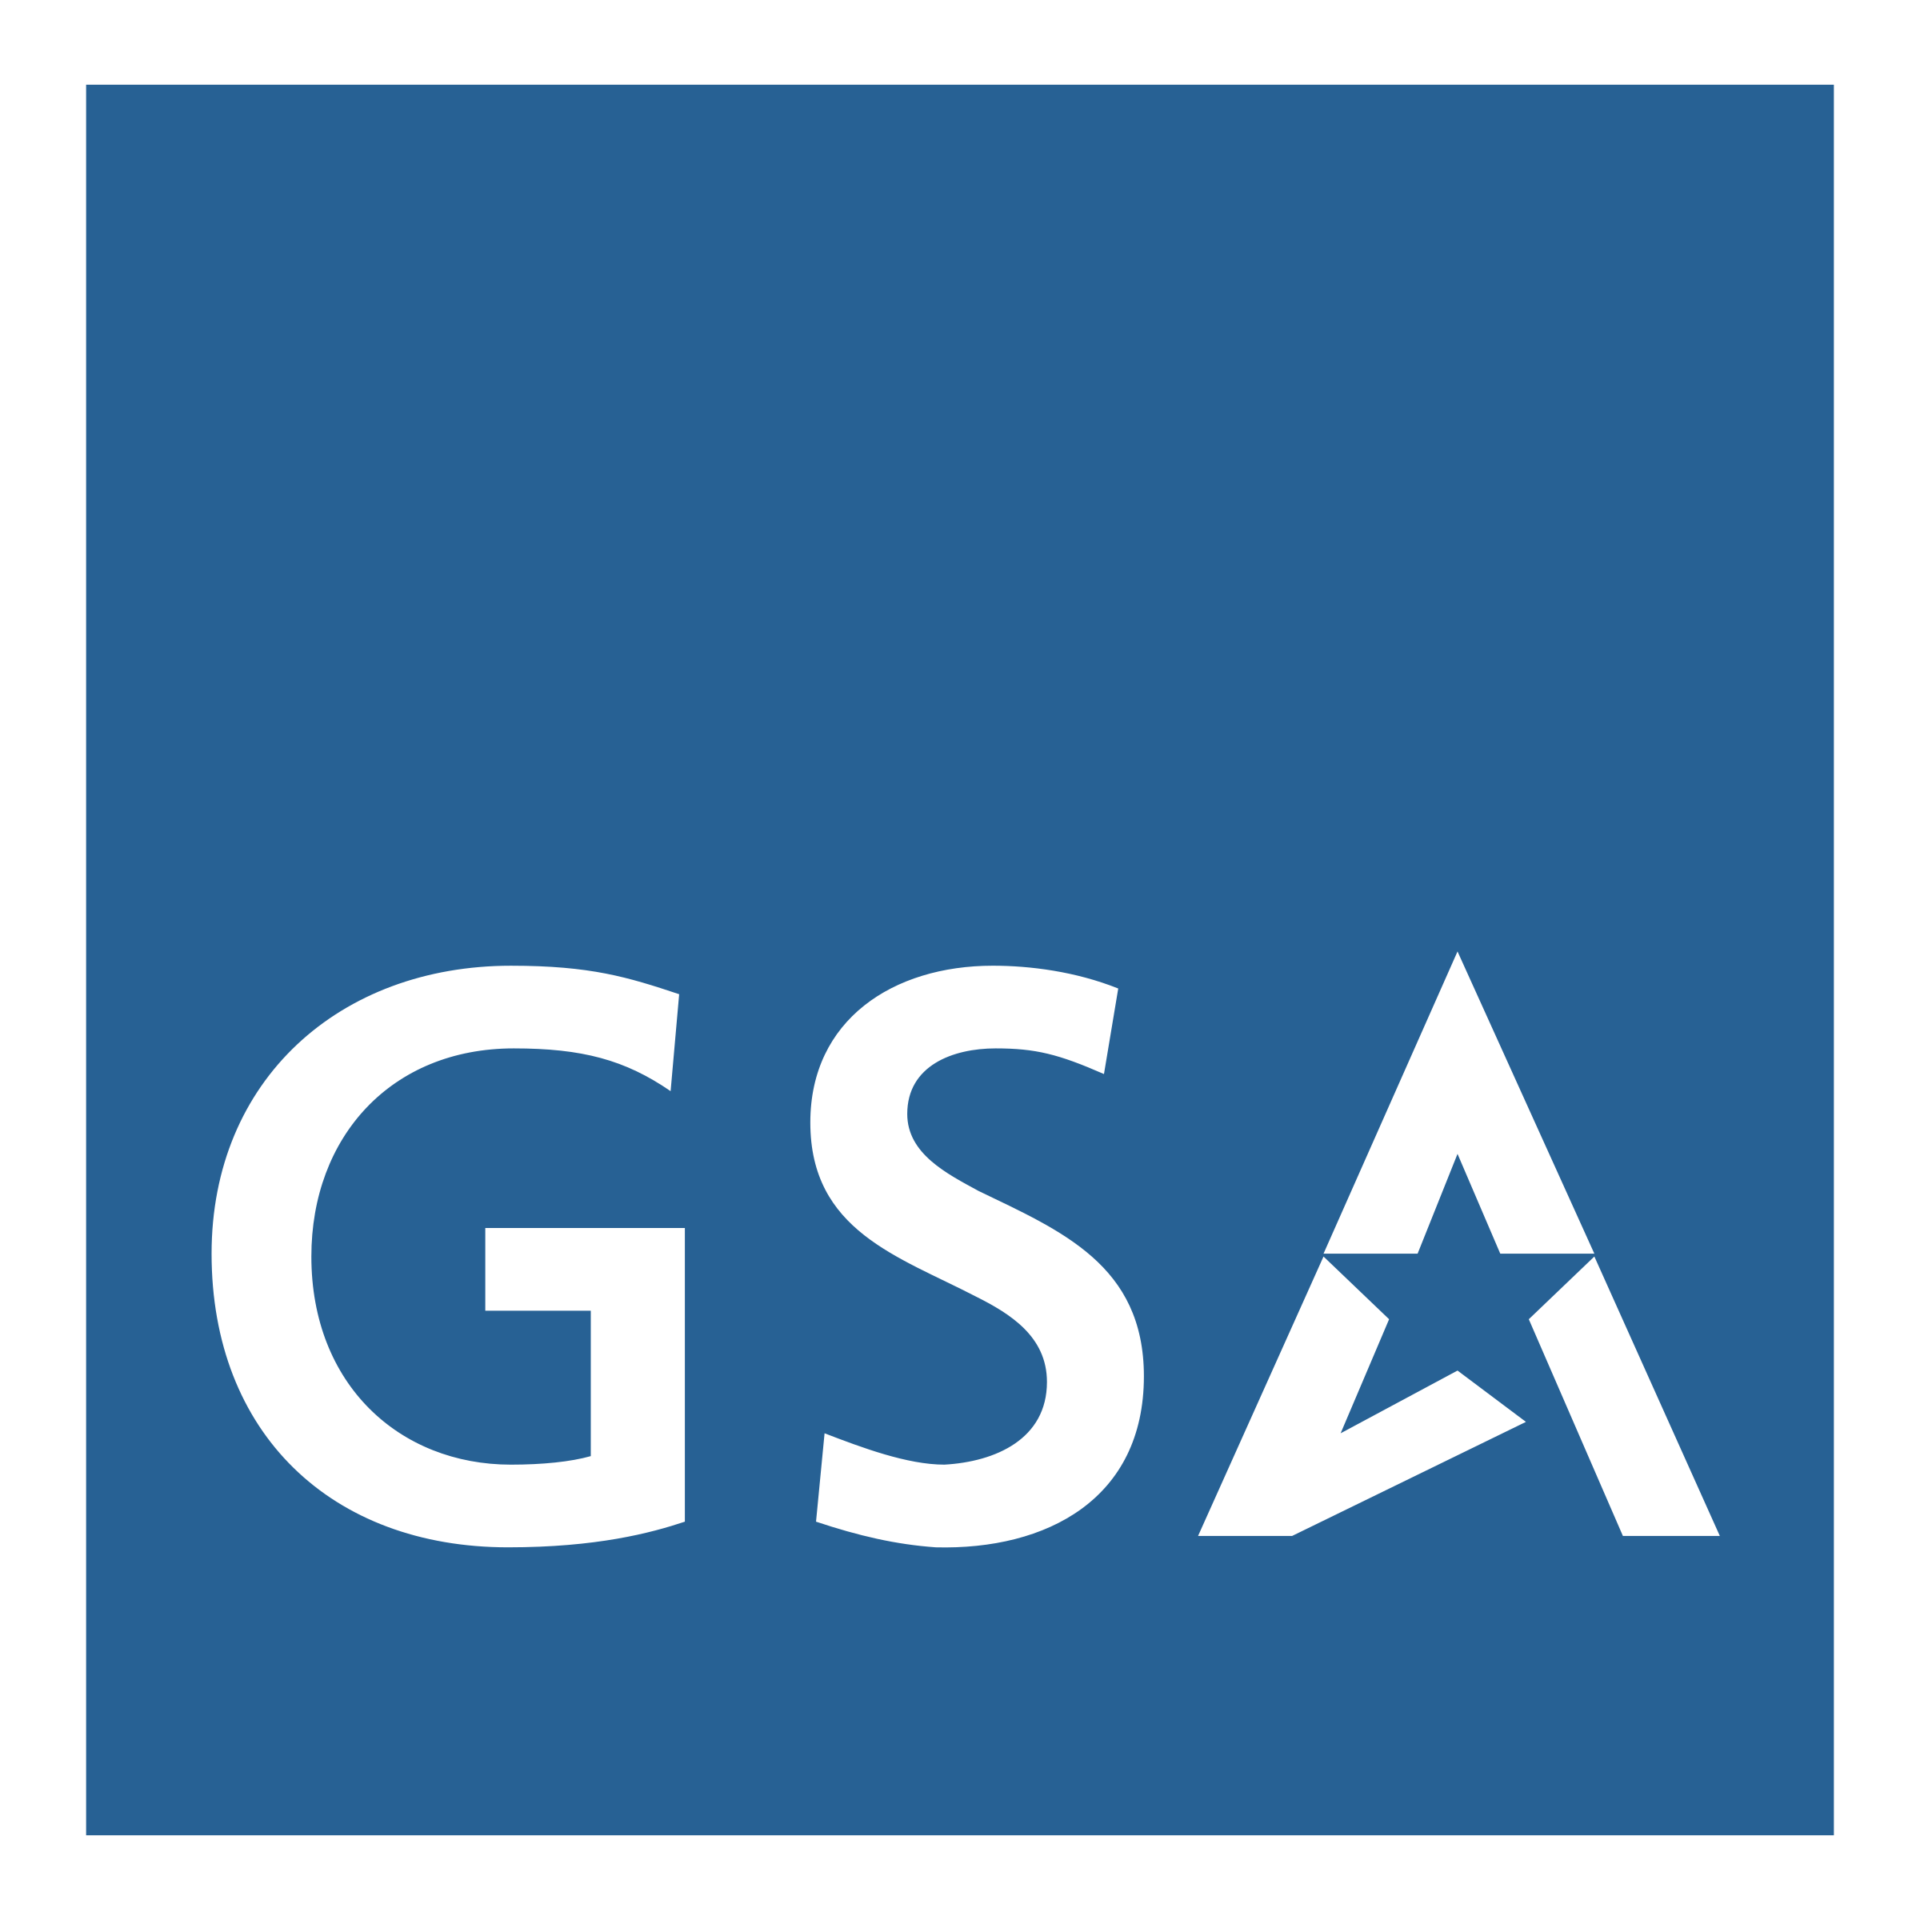 Logo of the General Services Administration (GSA